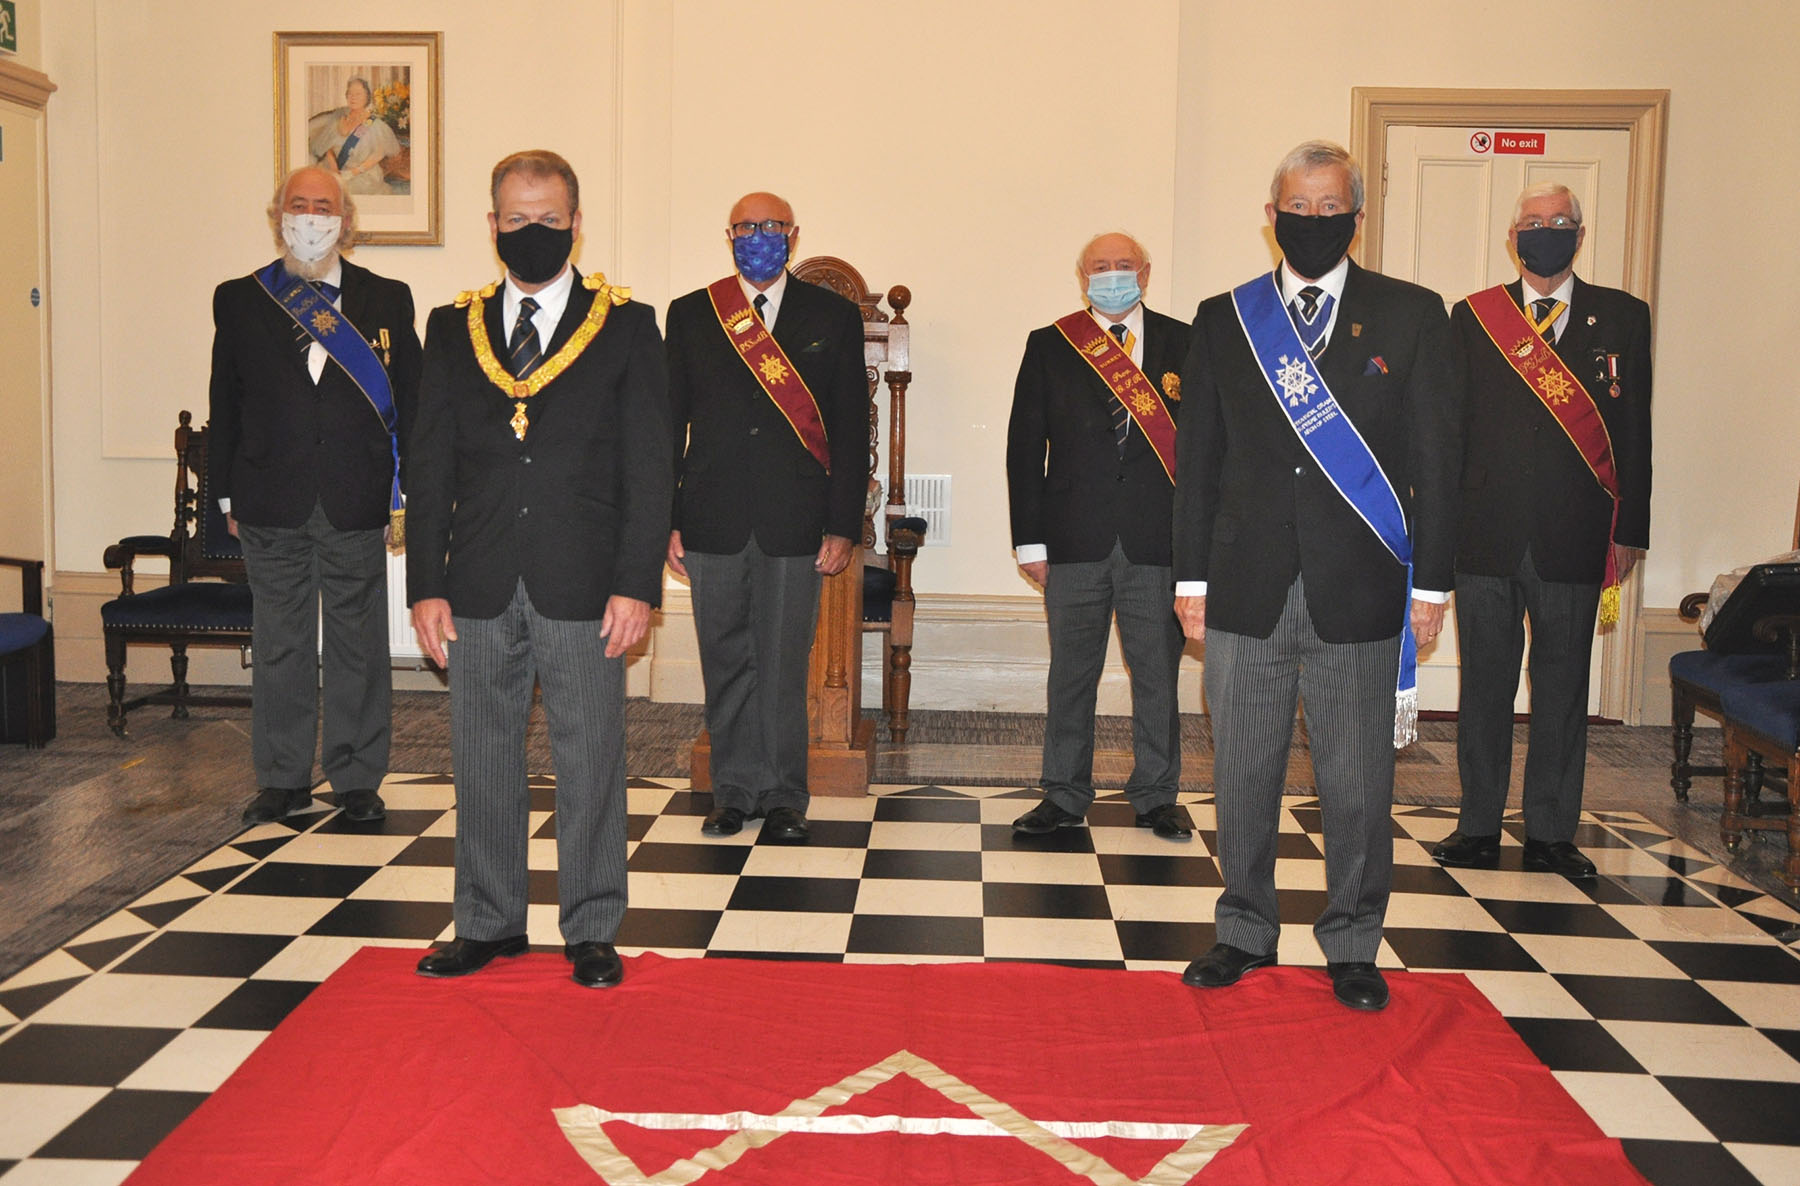 The Installation Meeting of Warlingham Conclave